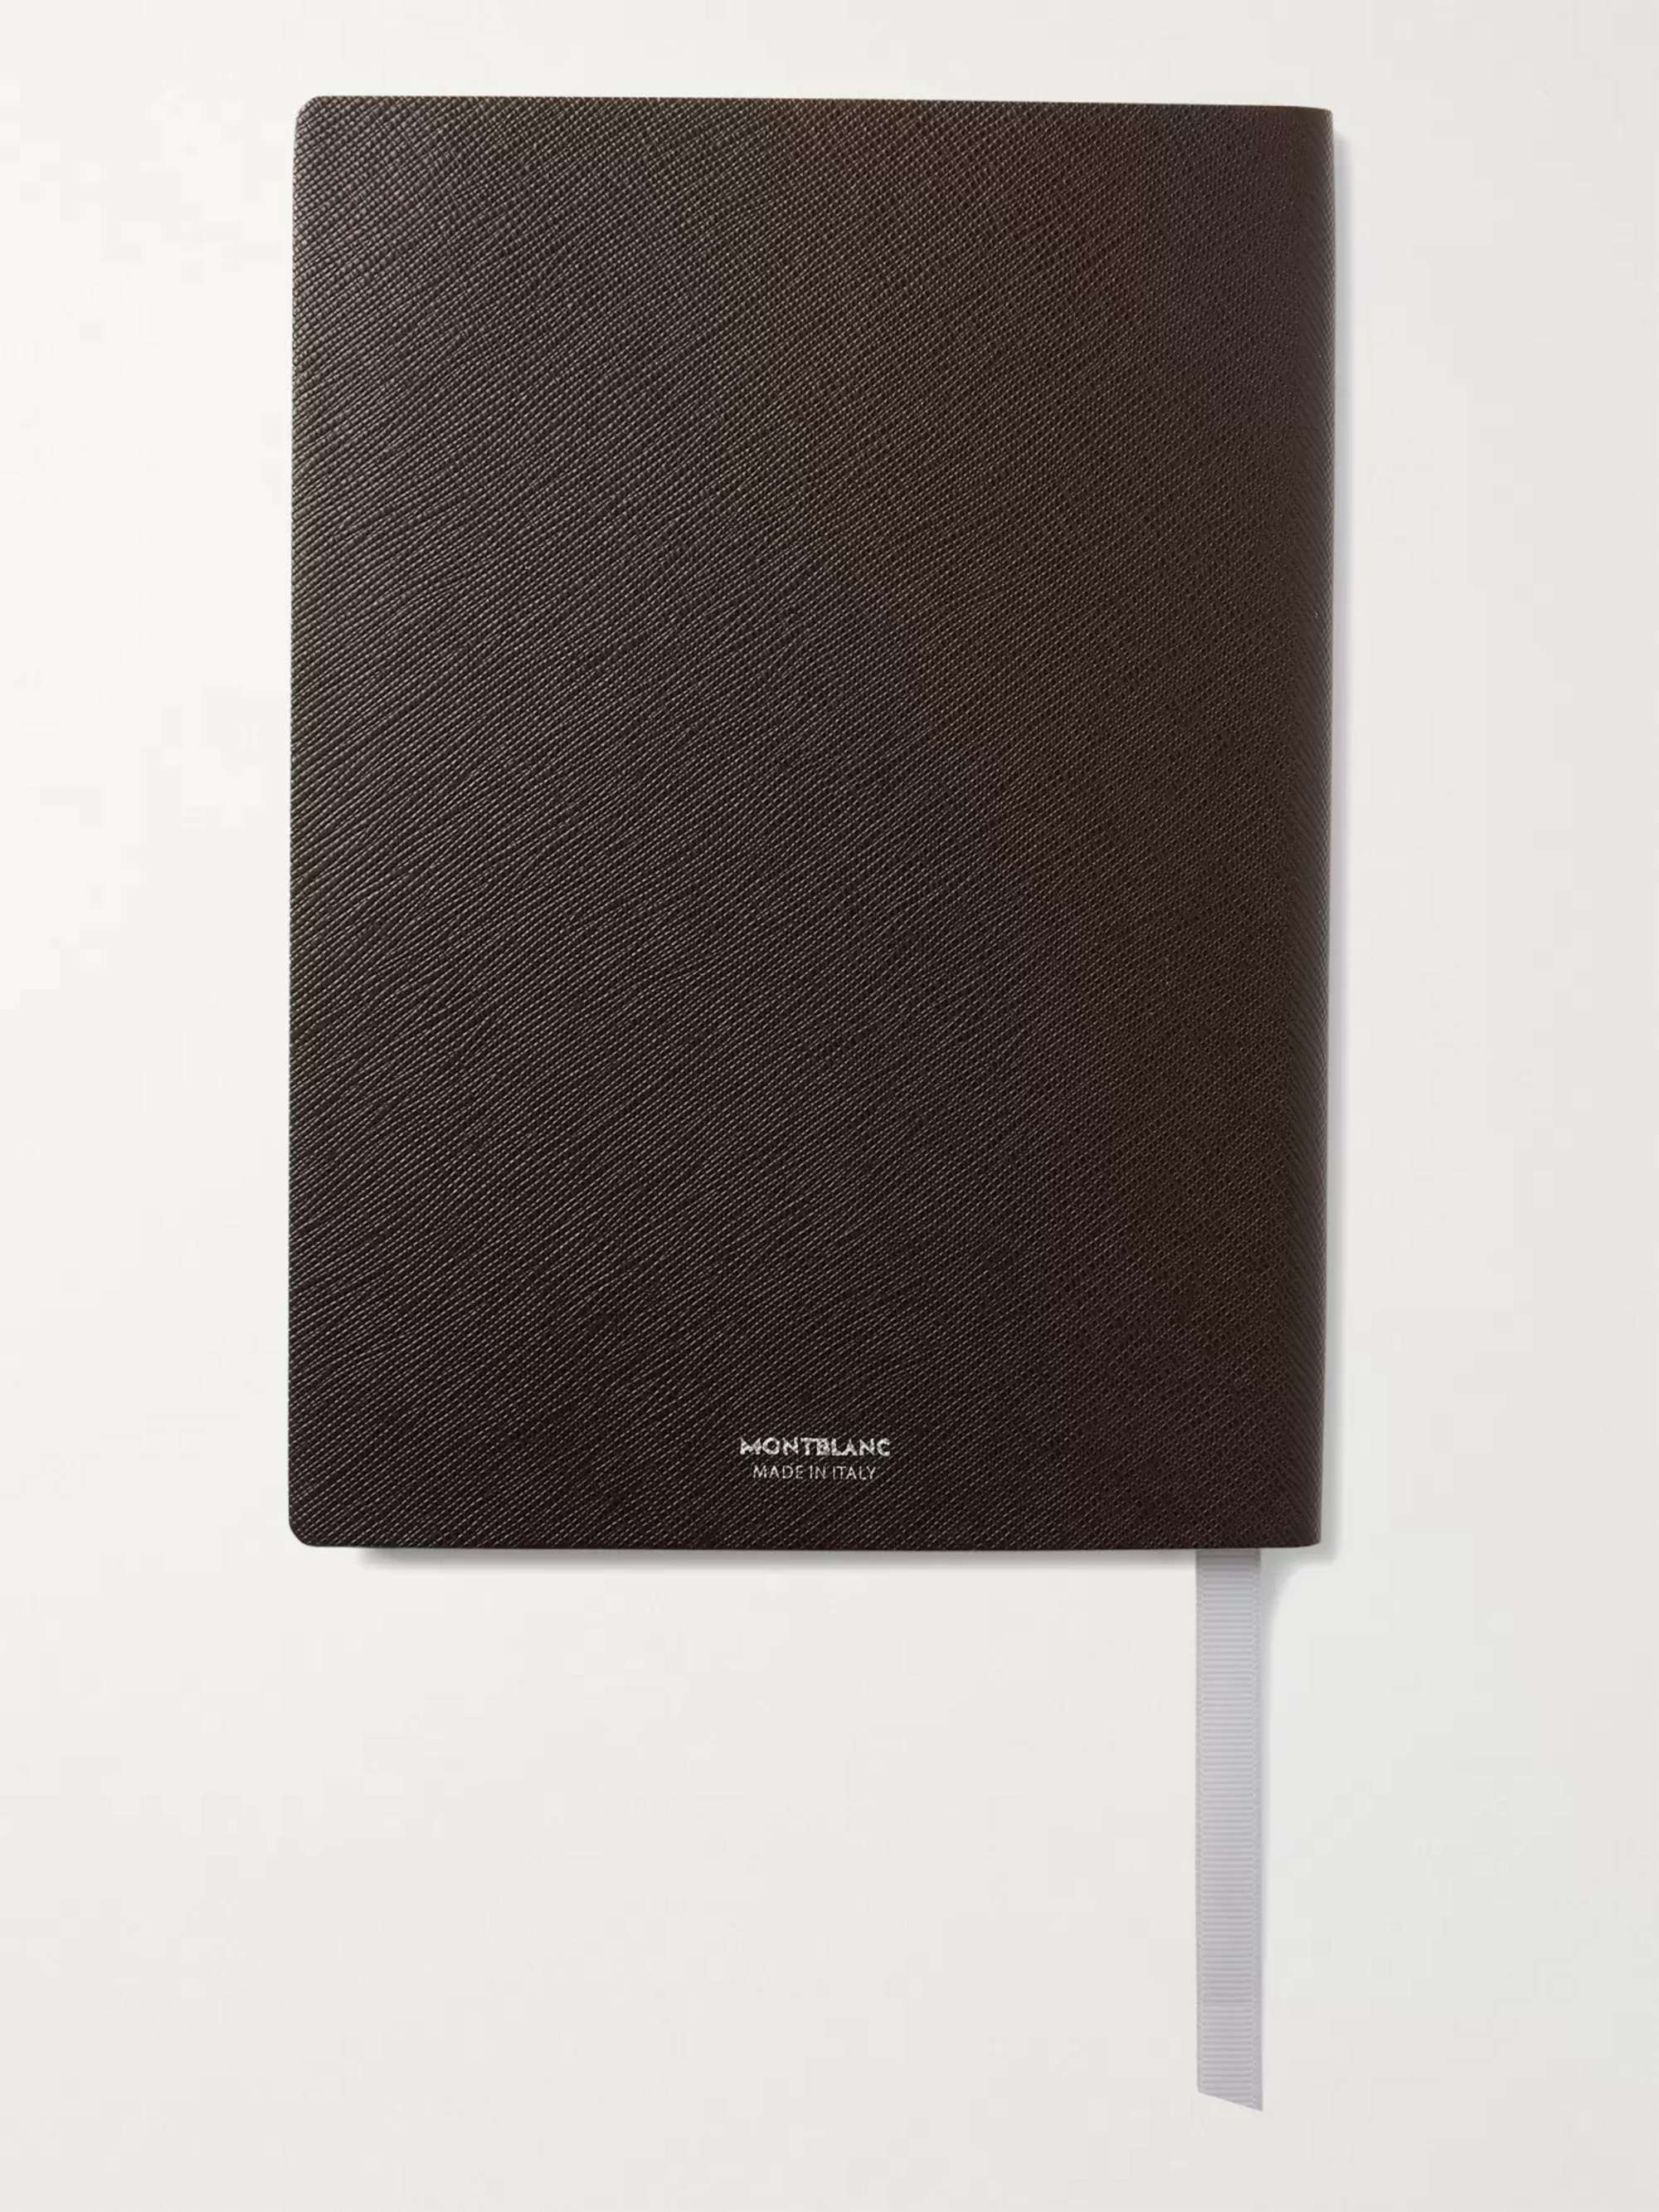 MONTBLANC 146 Cross-Grain Leather Notebook